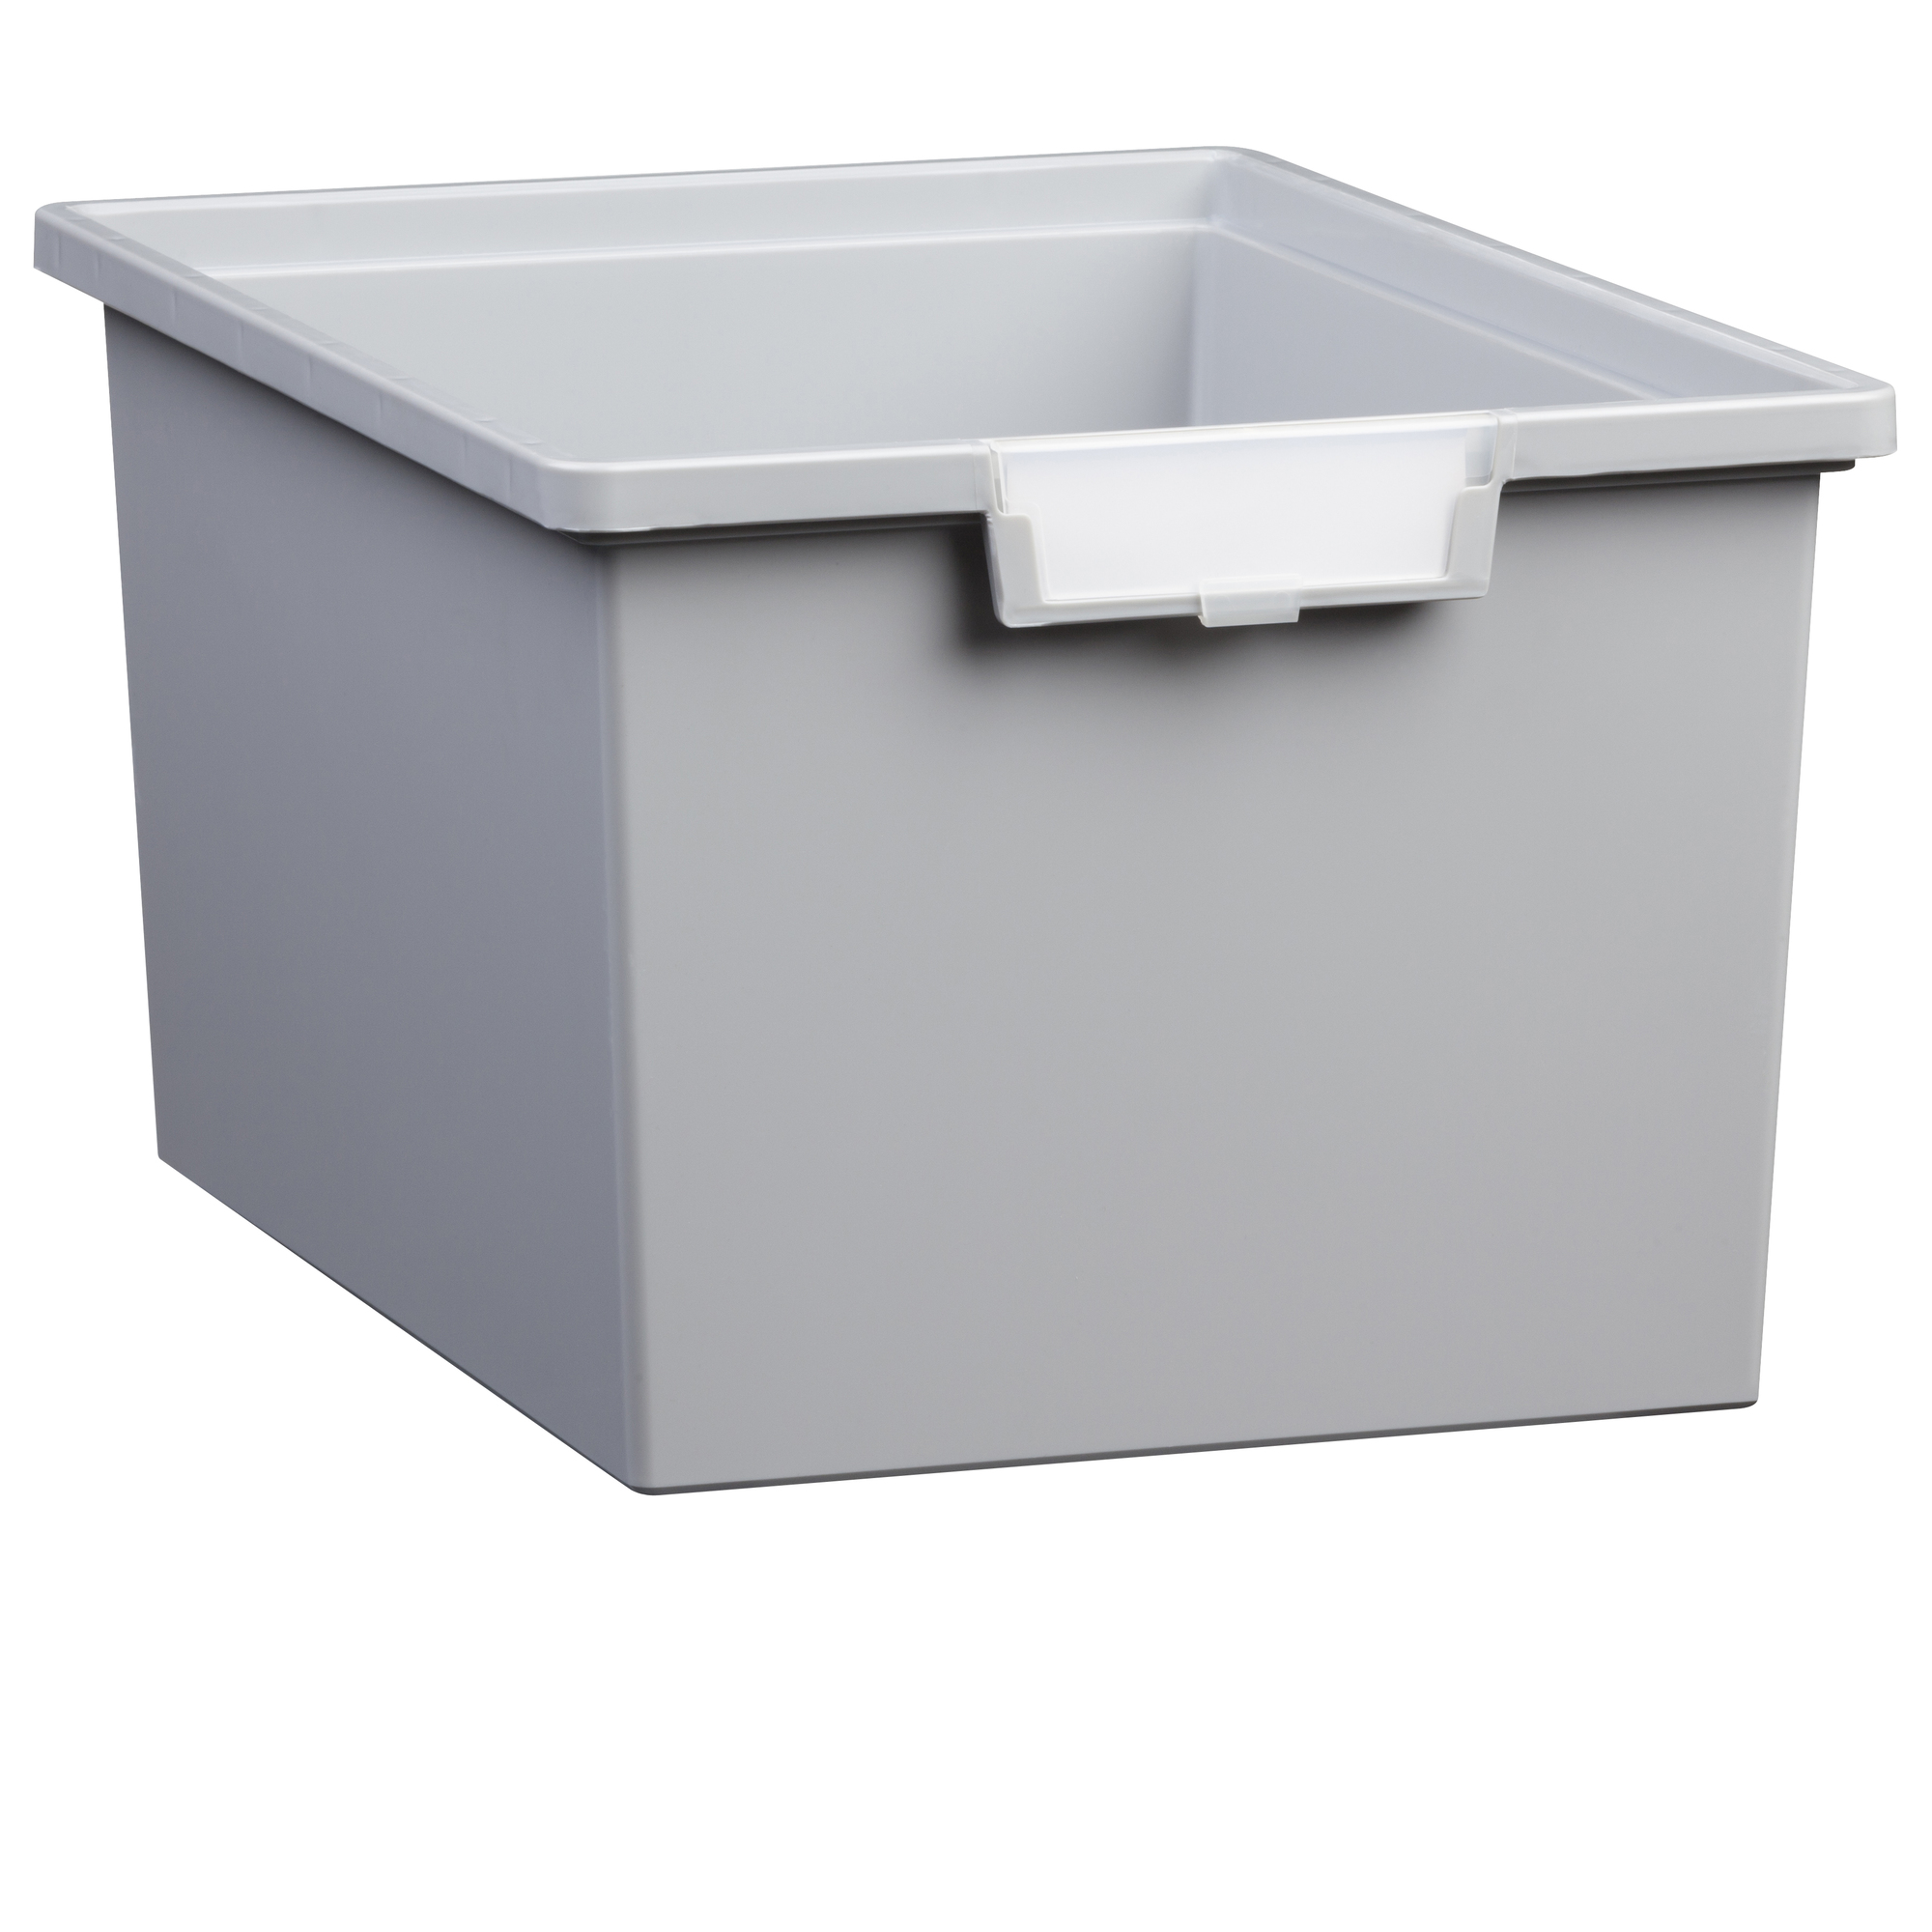 Certwood StorWerks, Slim Line 9Inch Tray in Light Gray-3PK, Included (qty.) 3 Height 9 in, Model CE1953LG3